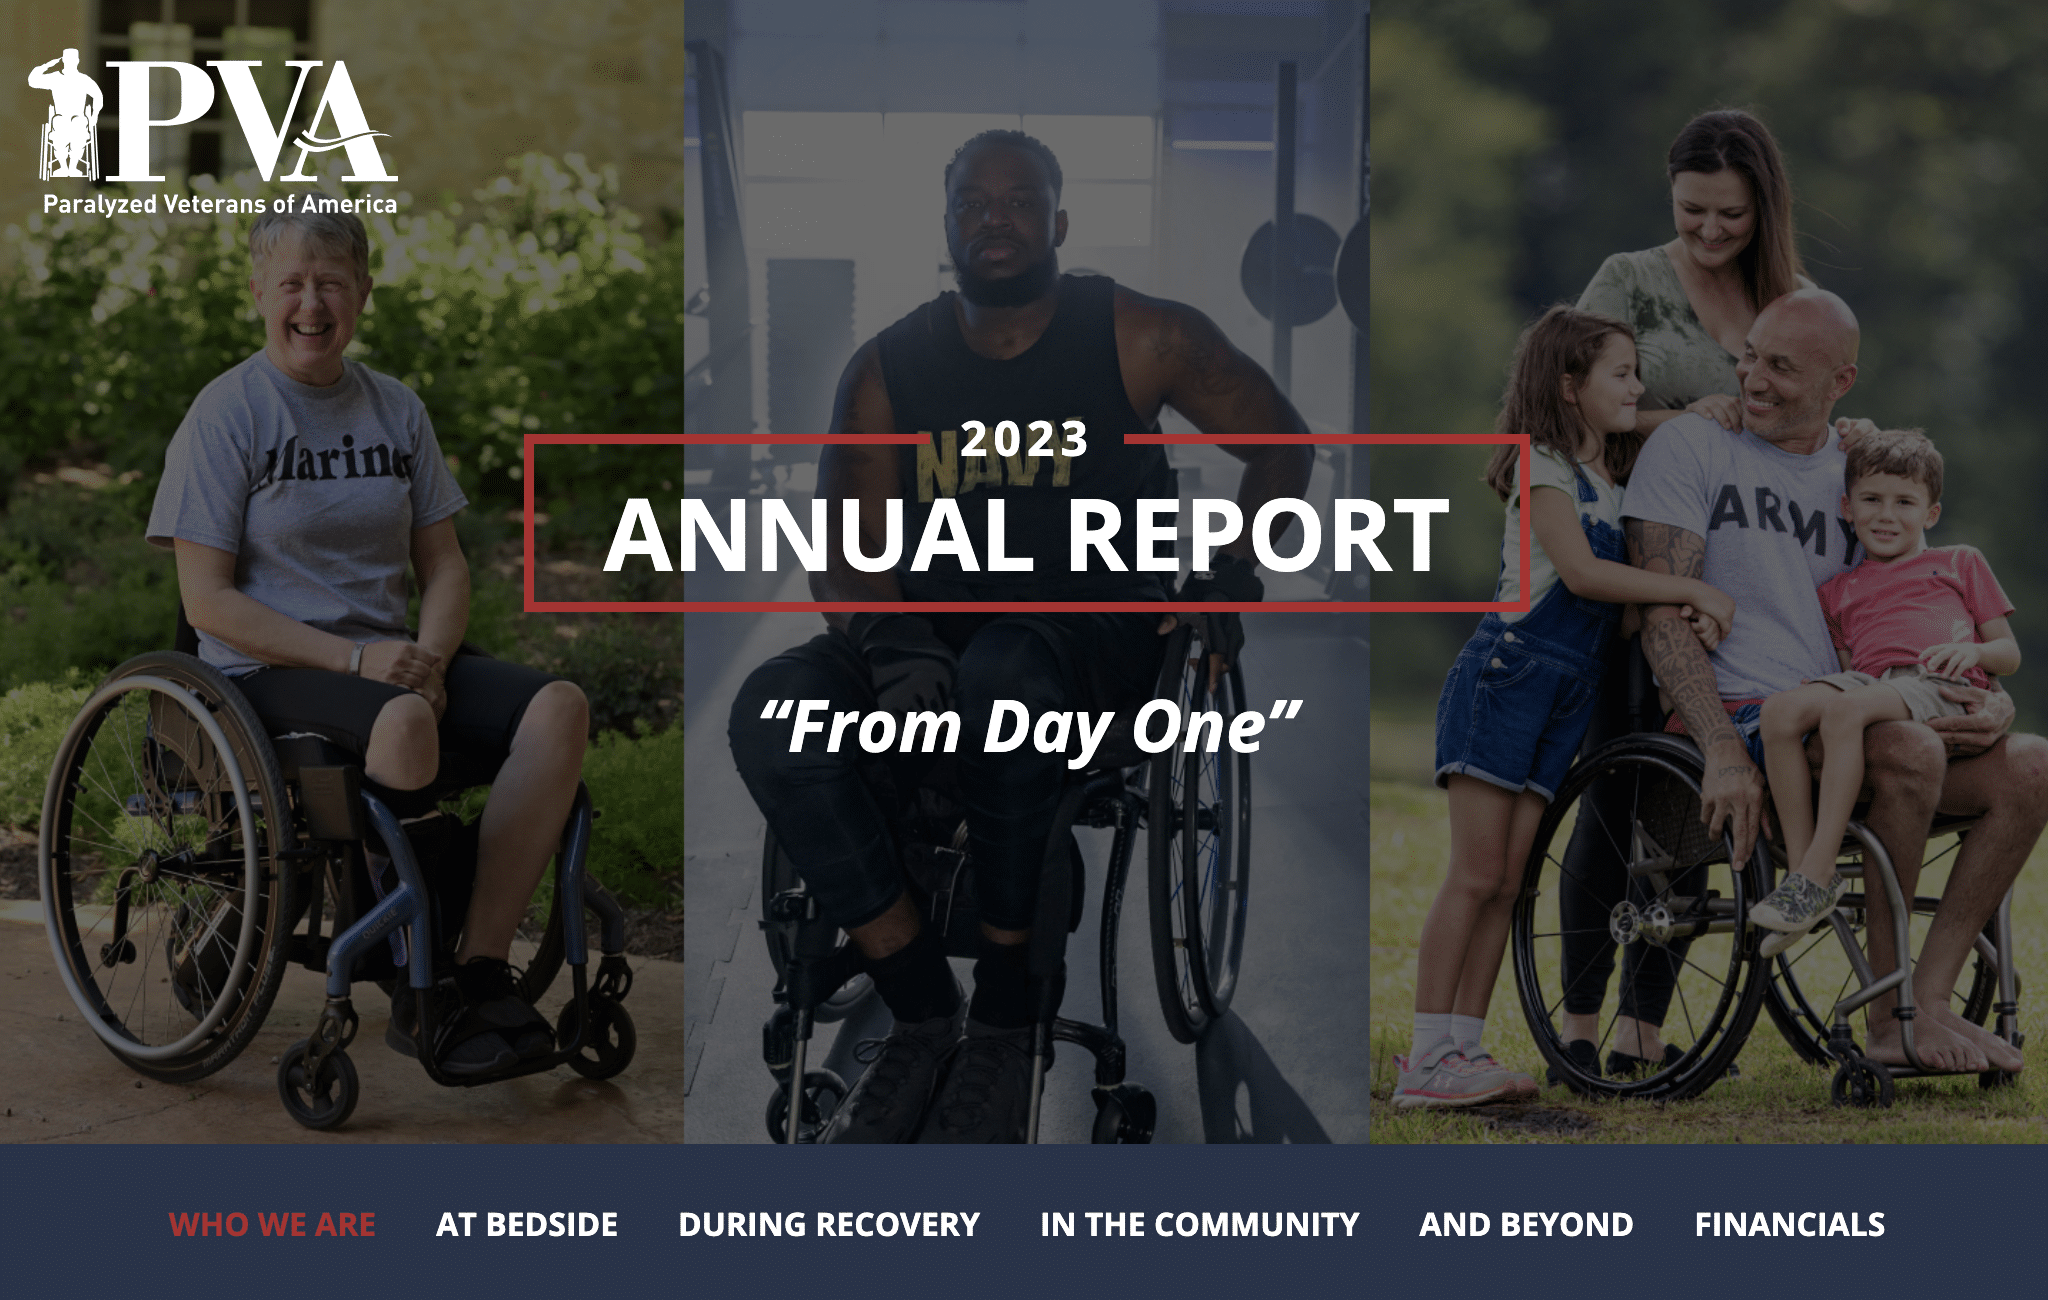 Preview Image of the 2023 PVA annual report featuring three photos of Veterans and the words "Annual Report, From Day One"